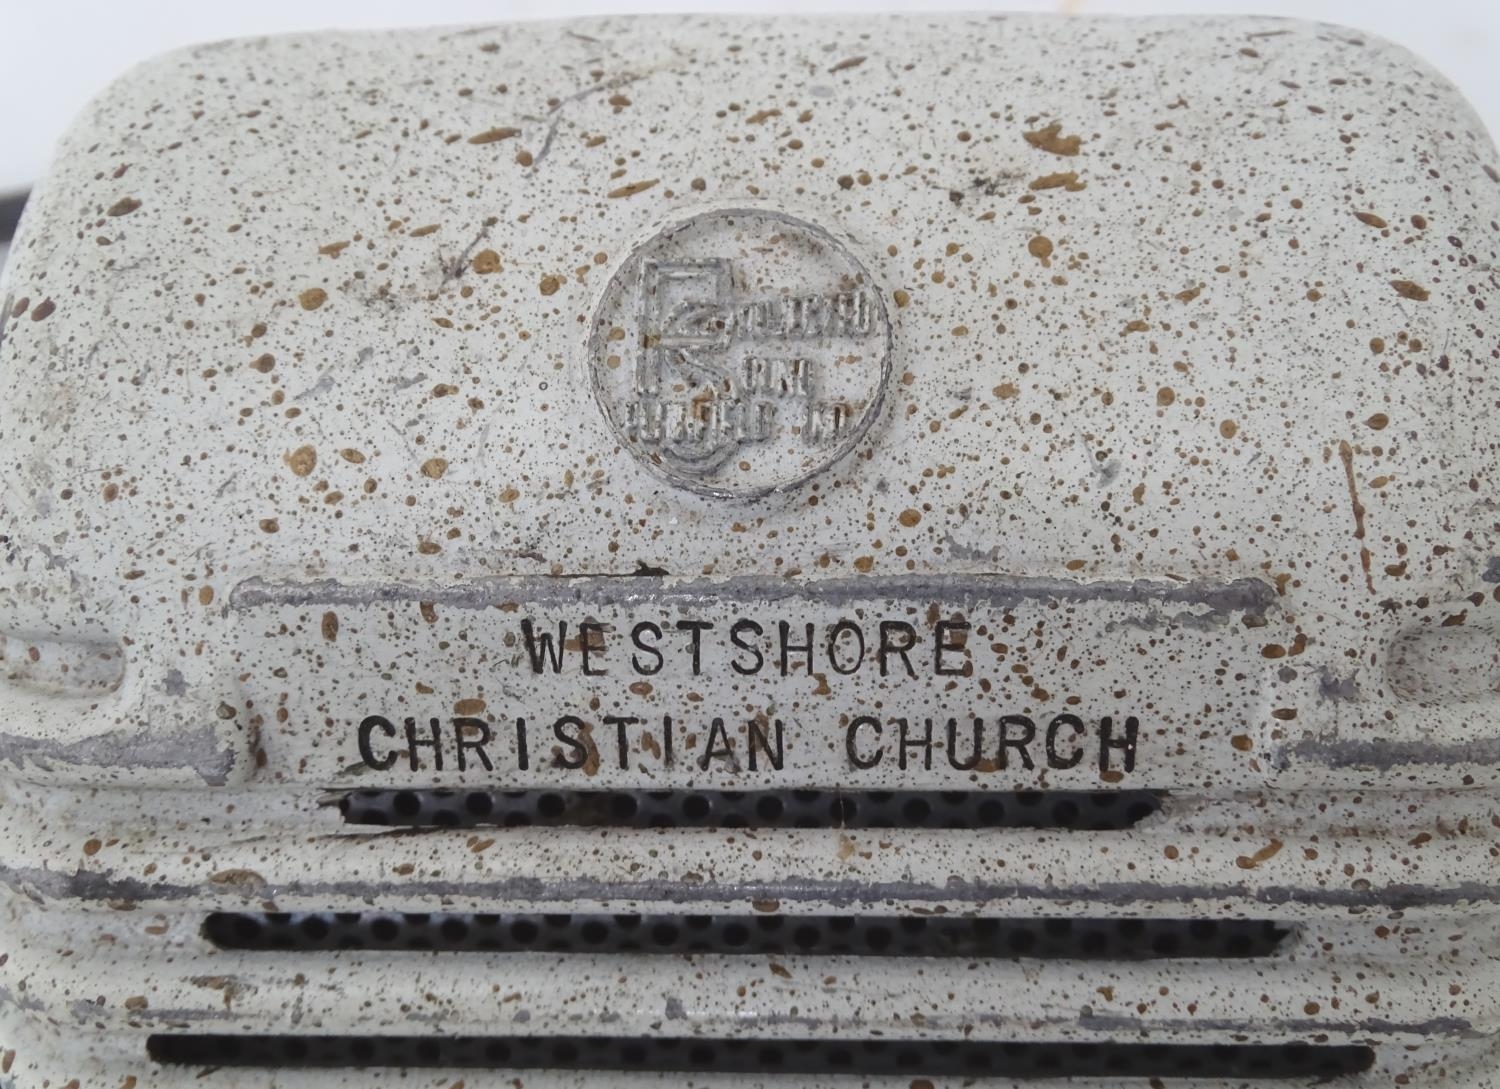 Set of 6 1950s mobile vehicle speakers, marked Westshore Christian Church, by Projected Sound (6) - Image 5 of 6